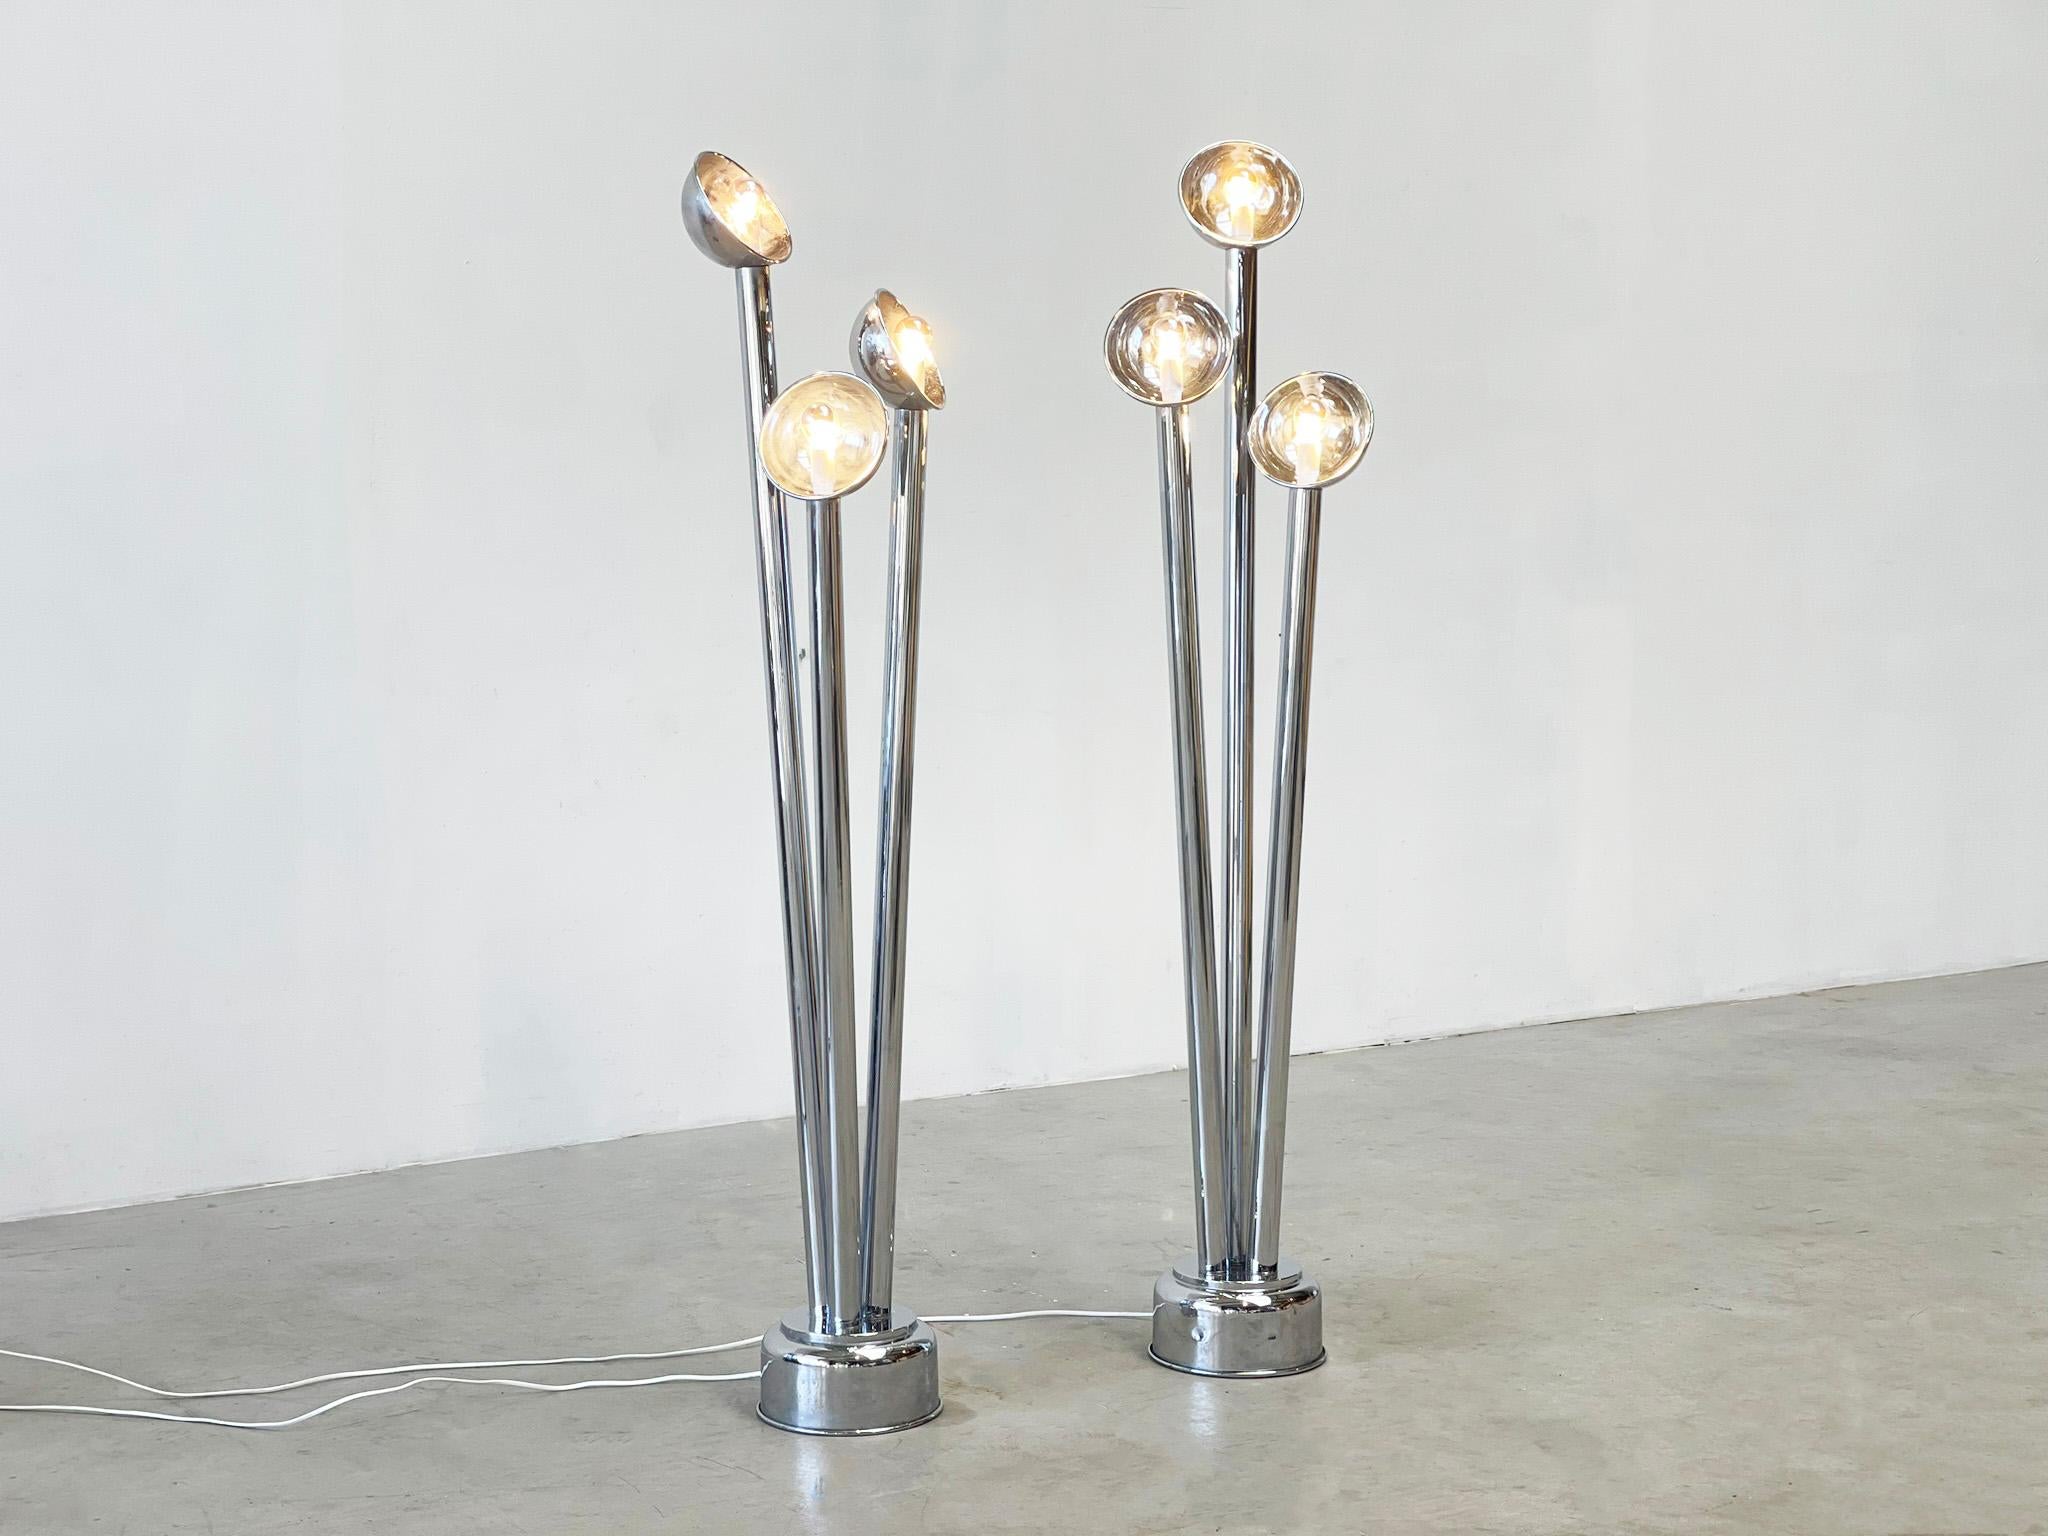 Couple of elegant chrome floorlamps
What a beautiful pair.

This pair of lamps are from the 1970s. The lamps were probably made France in a small edition. The nice thing about these lamps that they have a contemporary luxurious feel. you can put